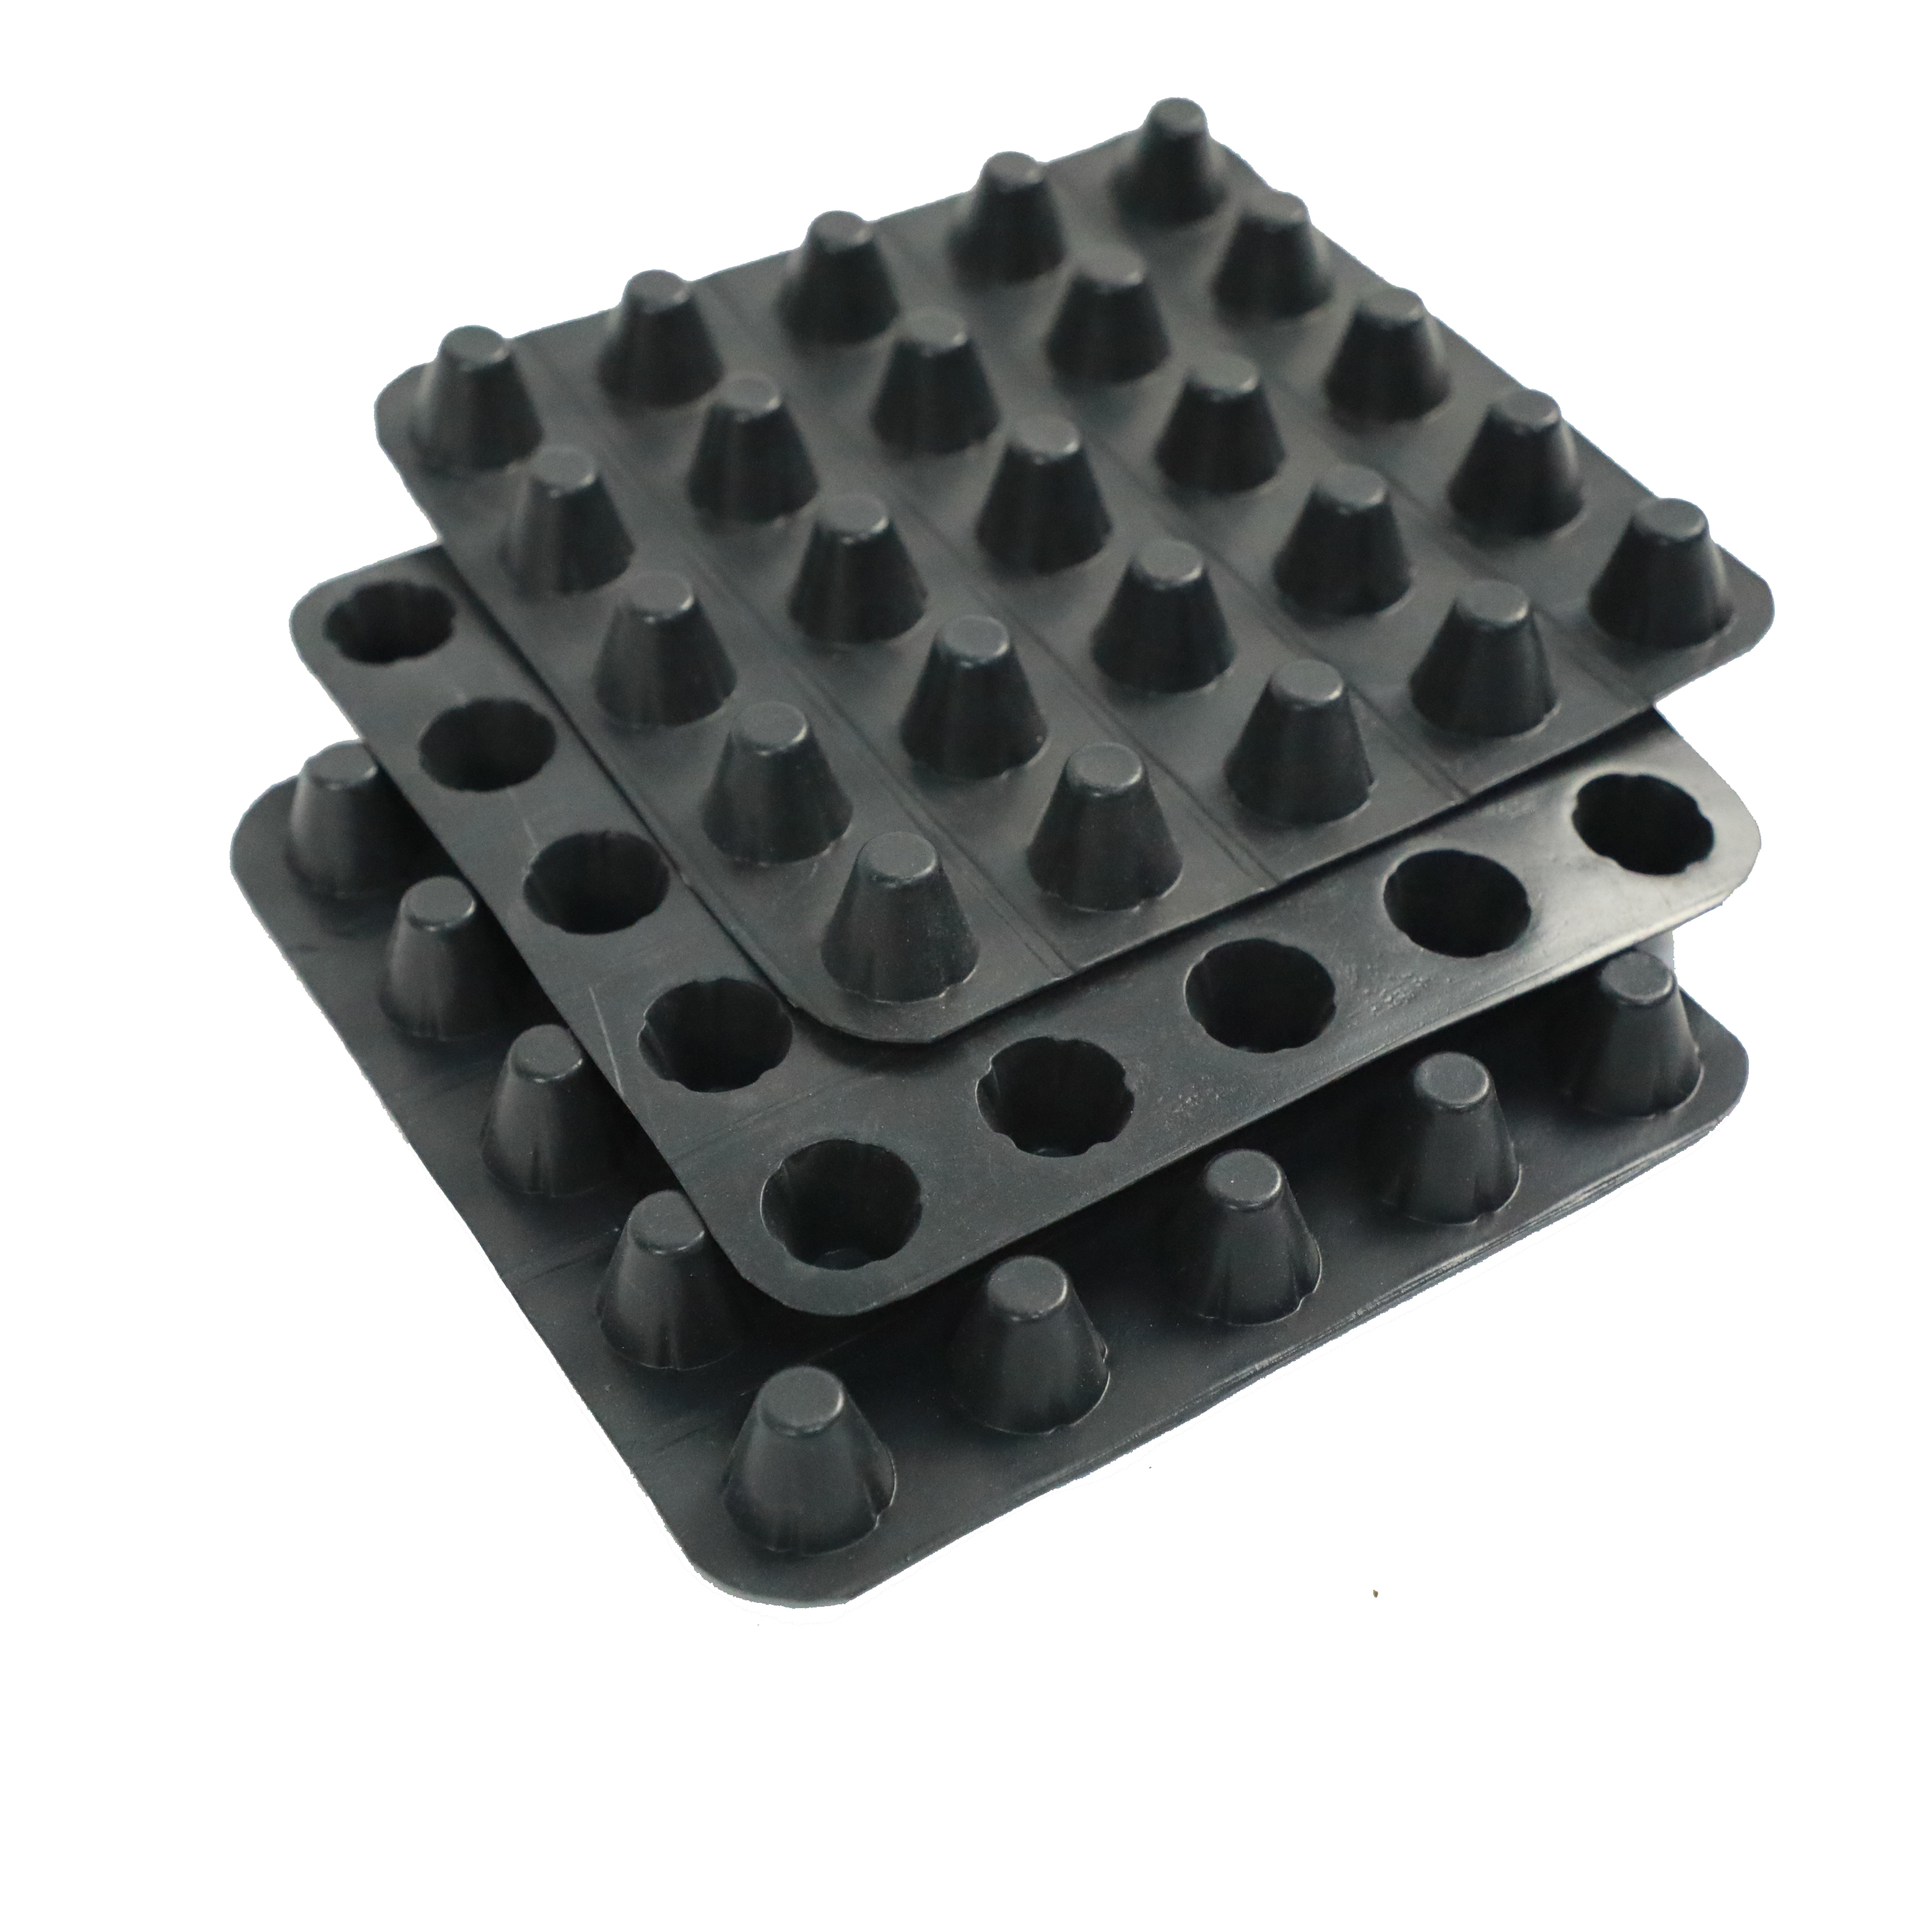 10mm PVC HDPE Plastic Dimpled Drain Dimple Drainage Board